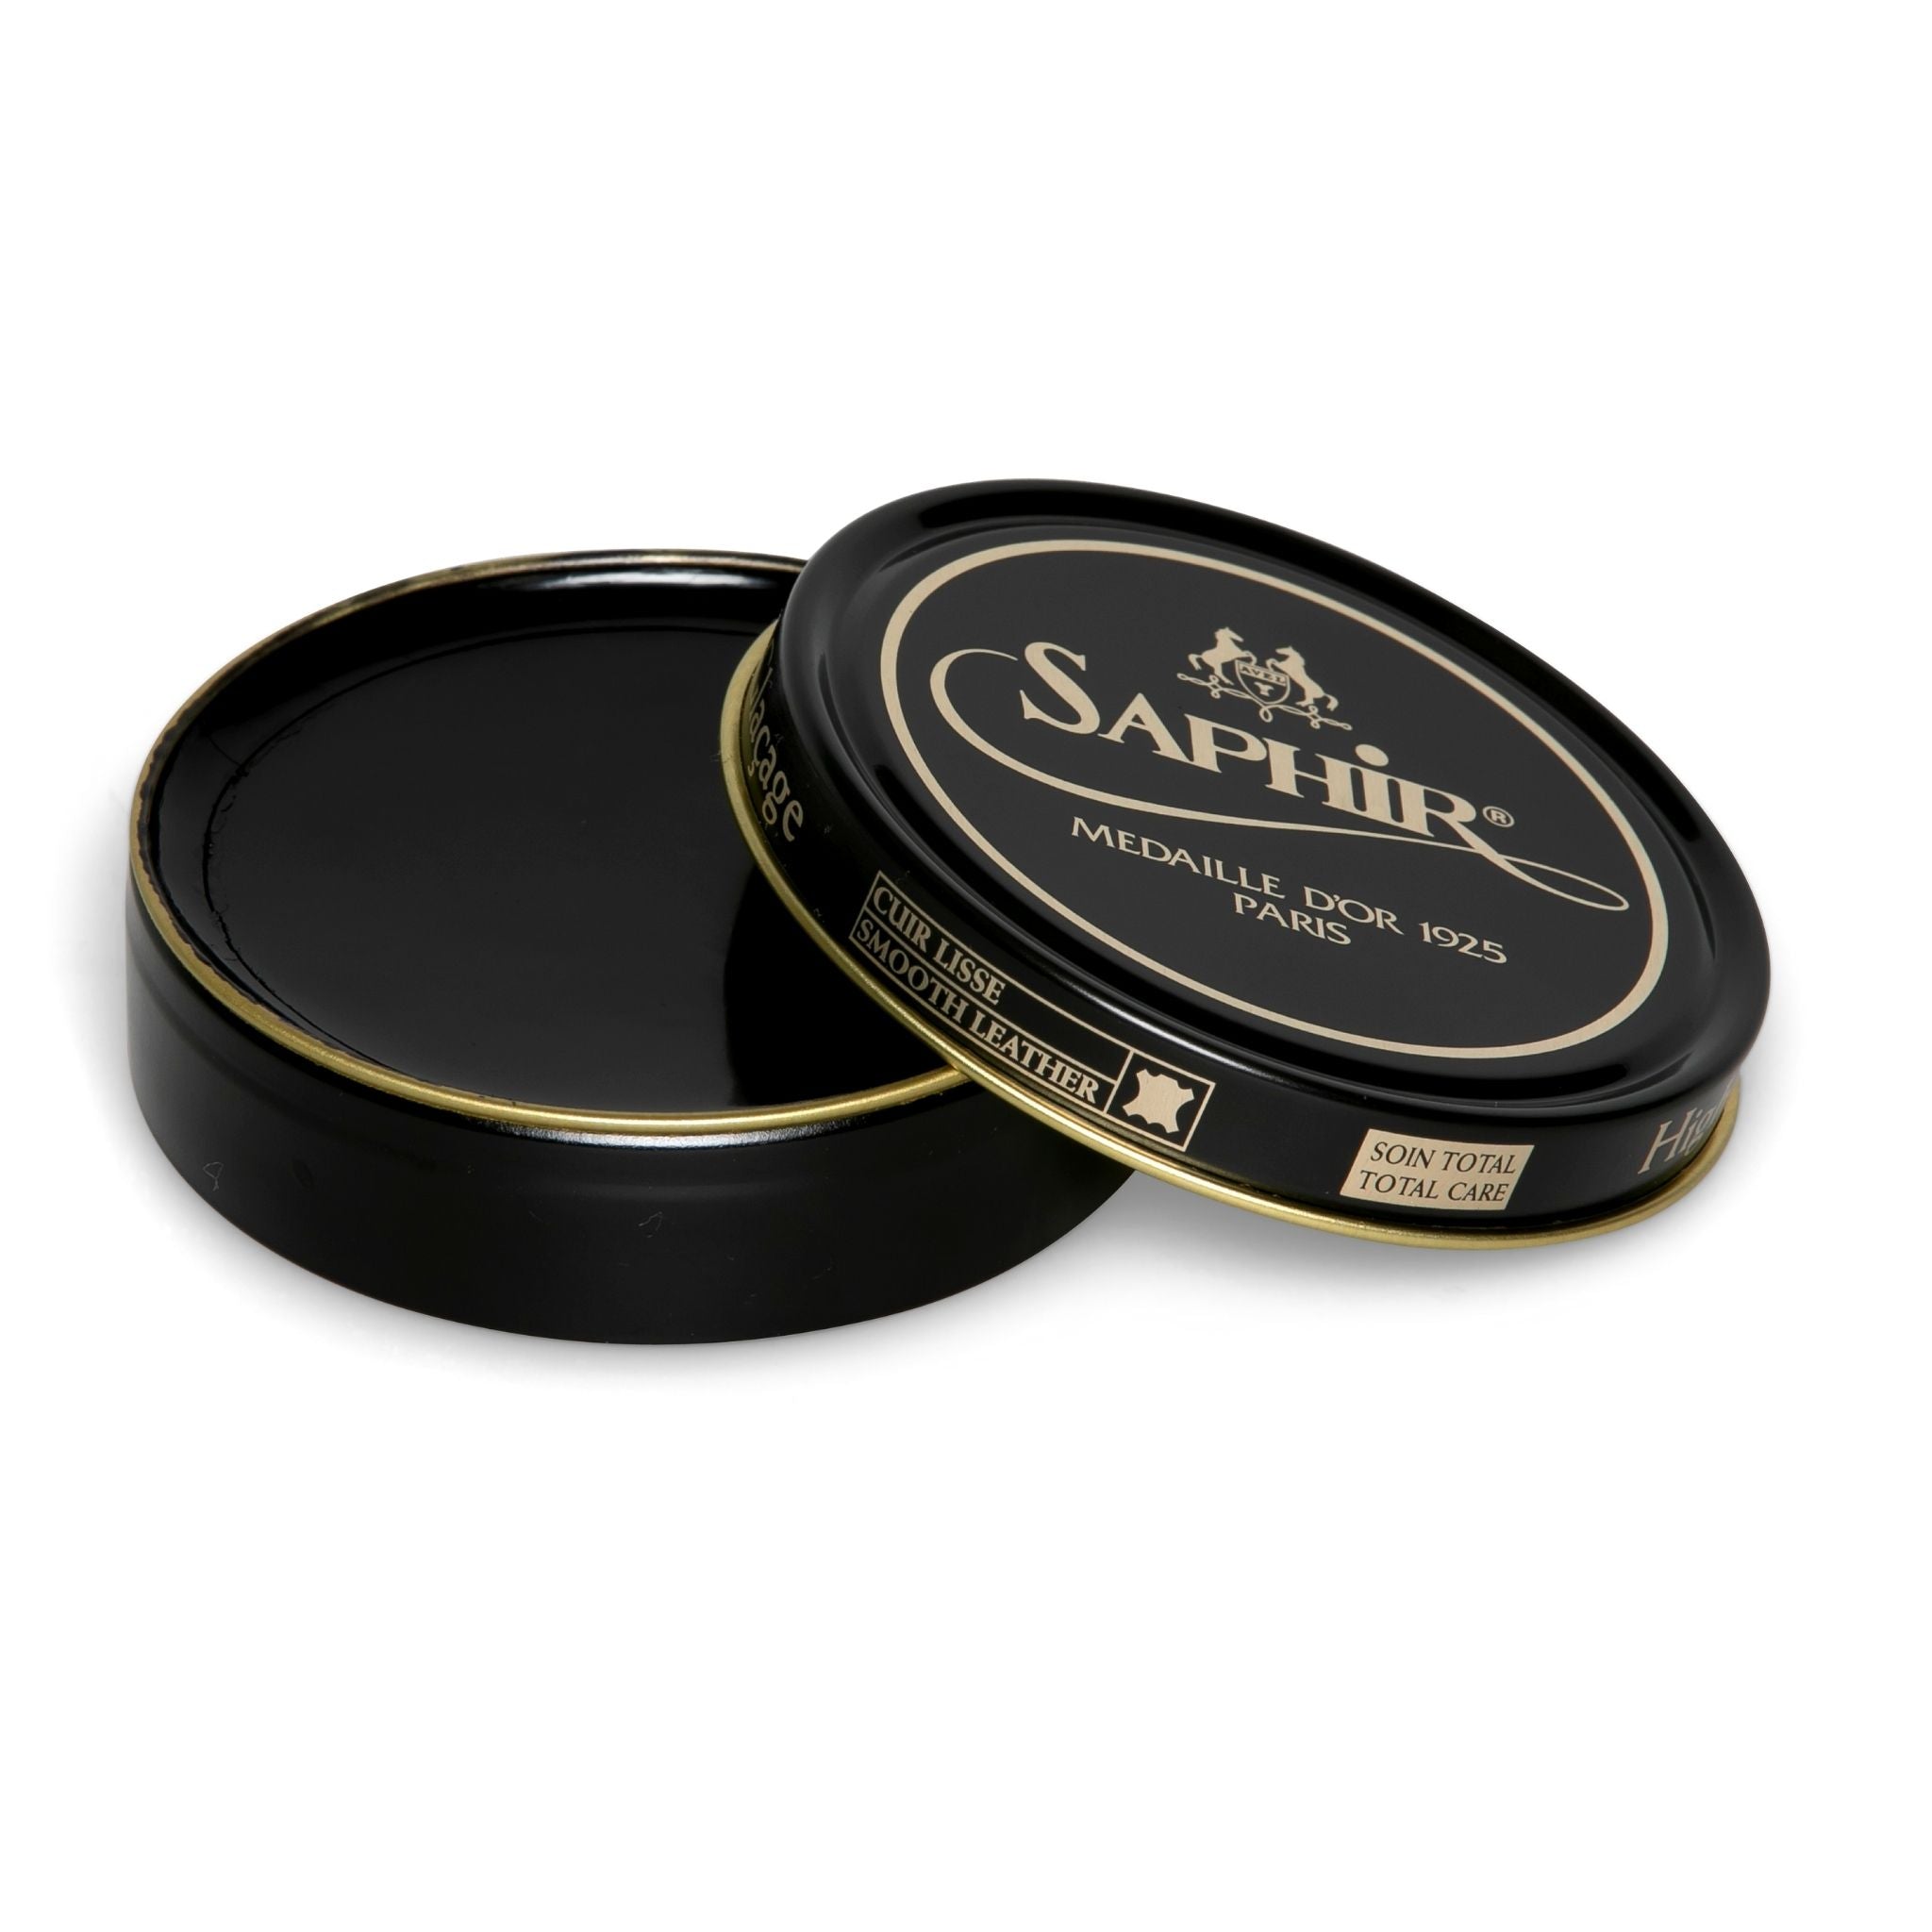 Saphir Pate de Luxe Wax Shoe Polish (50ml) in black colour is the perfect solution to achieve the ultimate shine